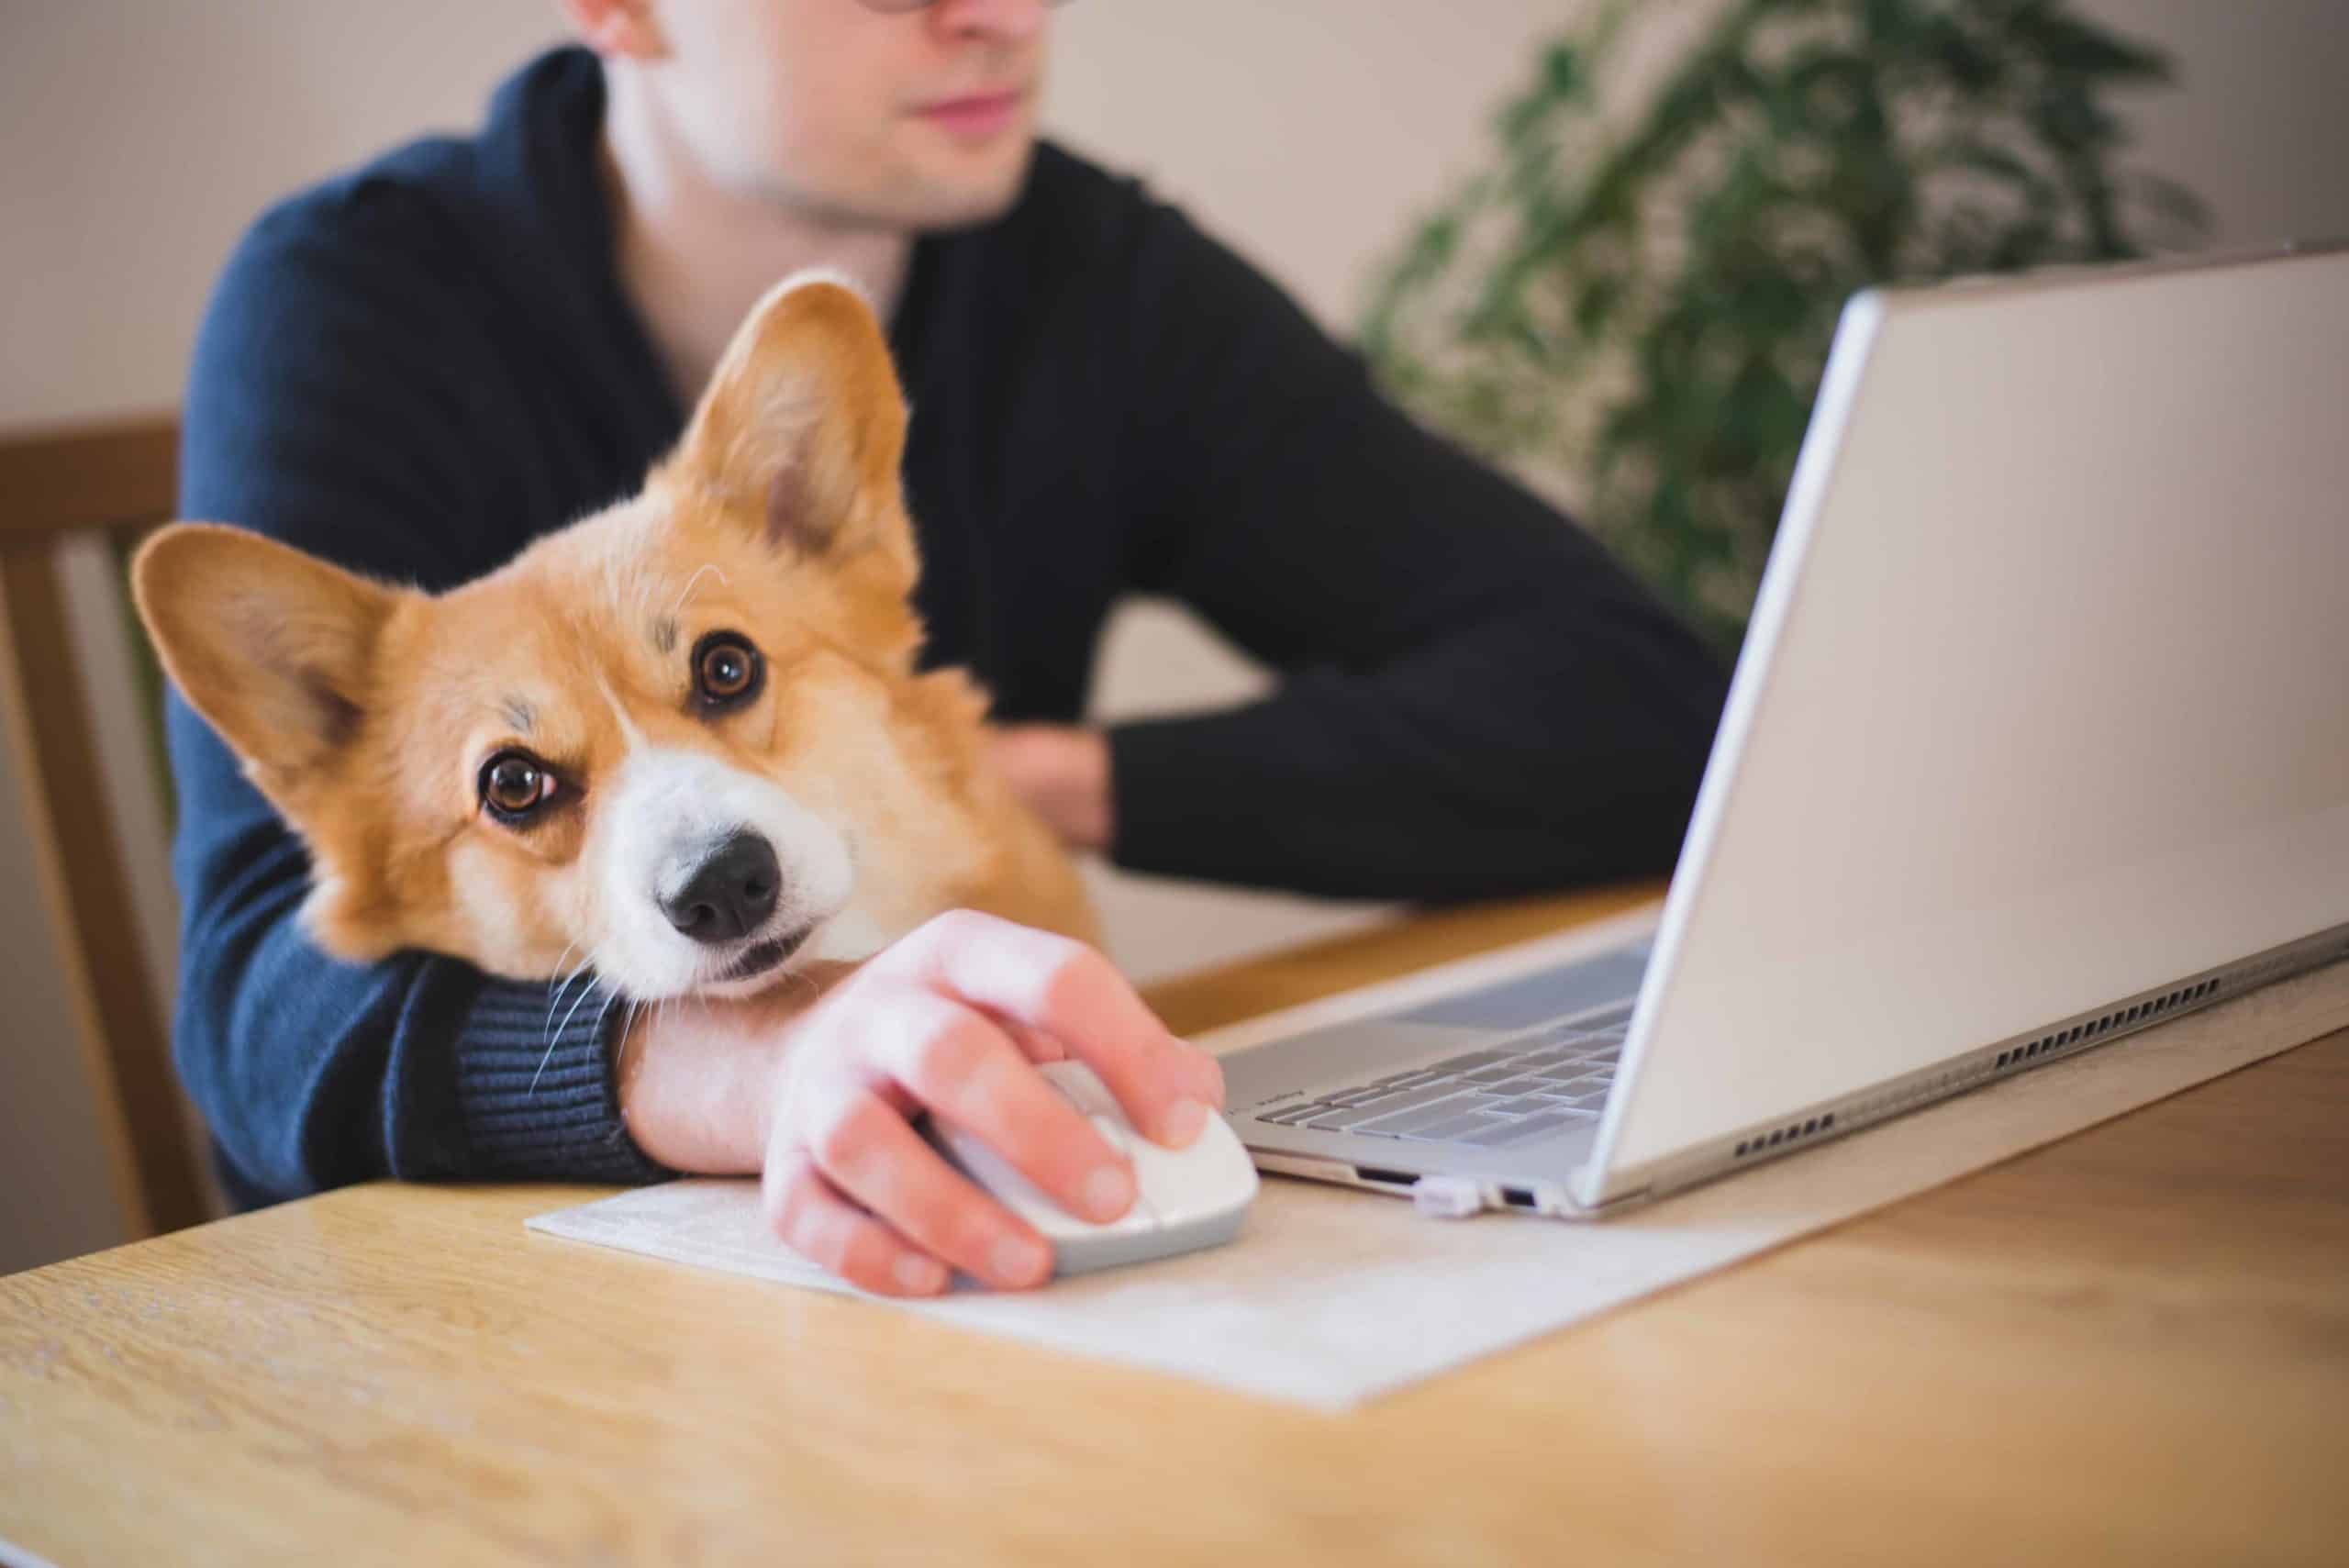 Man holds Corgi while working on laptop. If you provide your landlord with a legitimate ESA letter, then your landlord cannot deny you and your ESA reasonable accommodation.